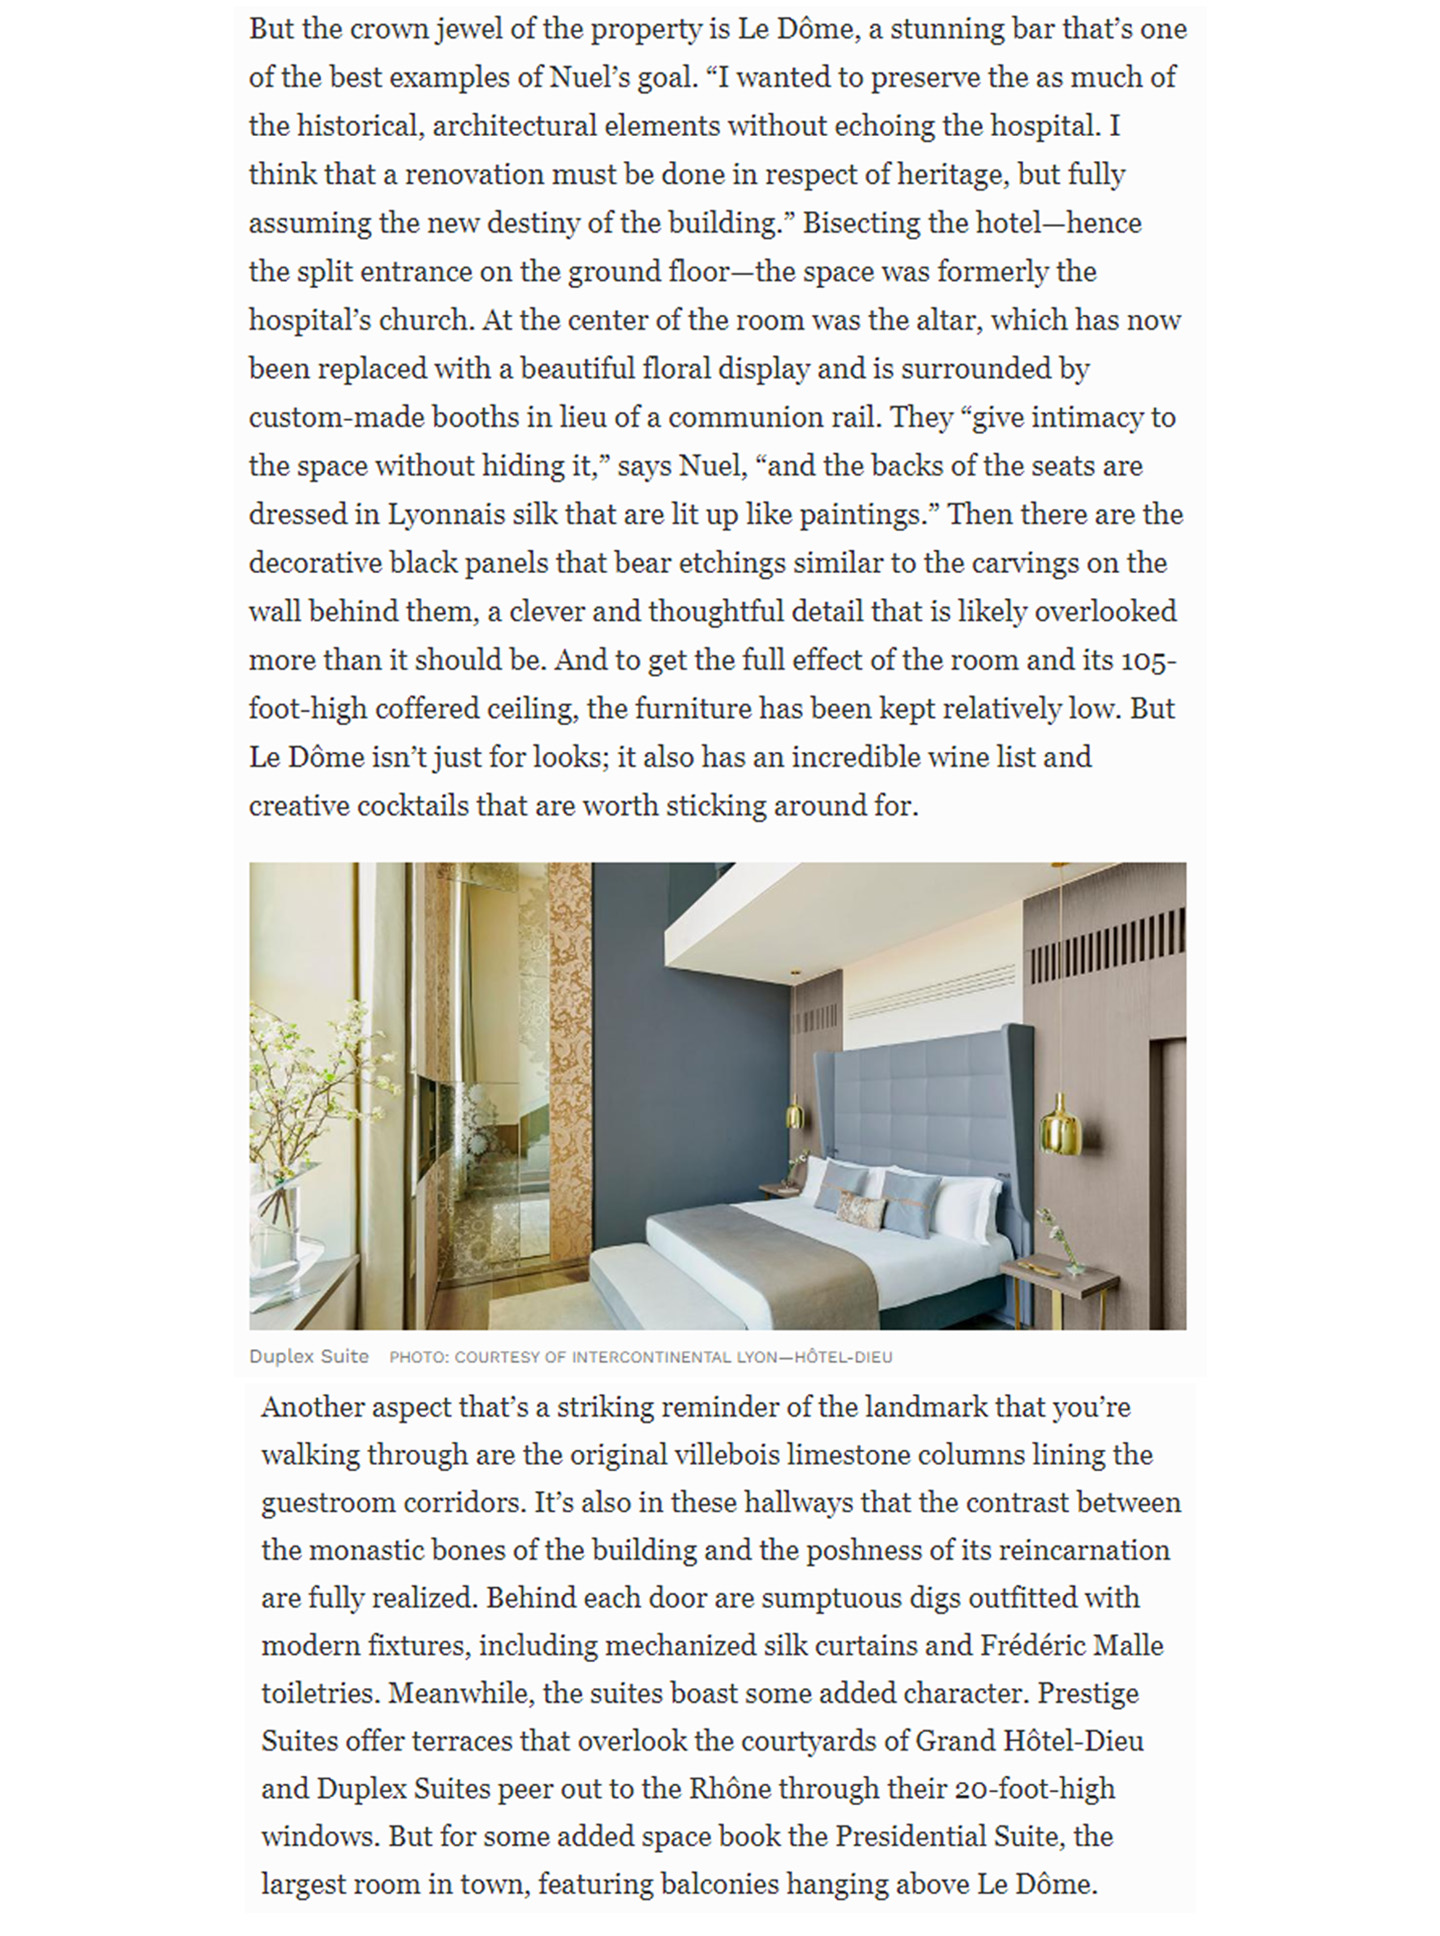 Article on the InterContinental Lyon Hotel Dieu realized by the studio Jean-Philippe Nuel in the magazine Forbes, new luxury hotel, luxury interior design, historical heritage